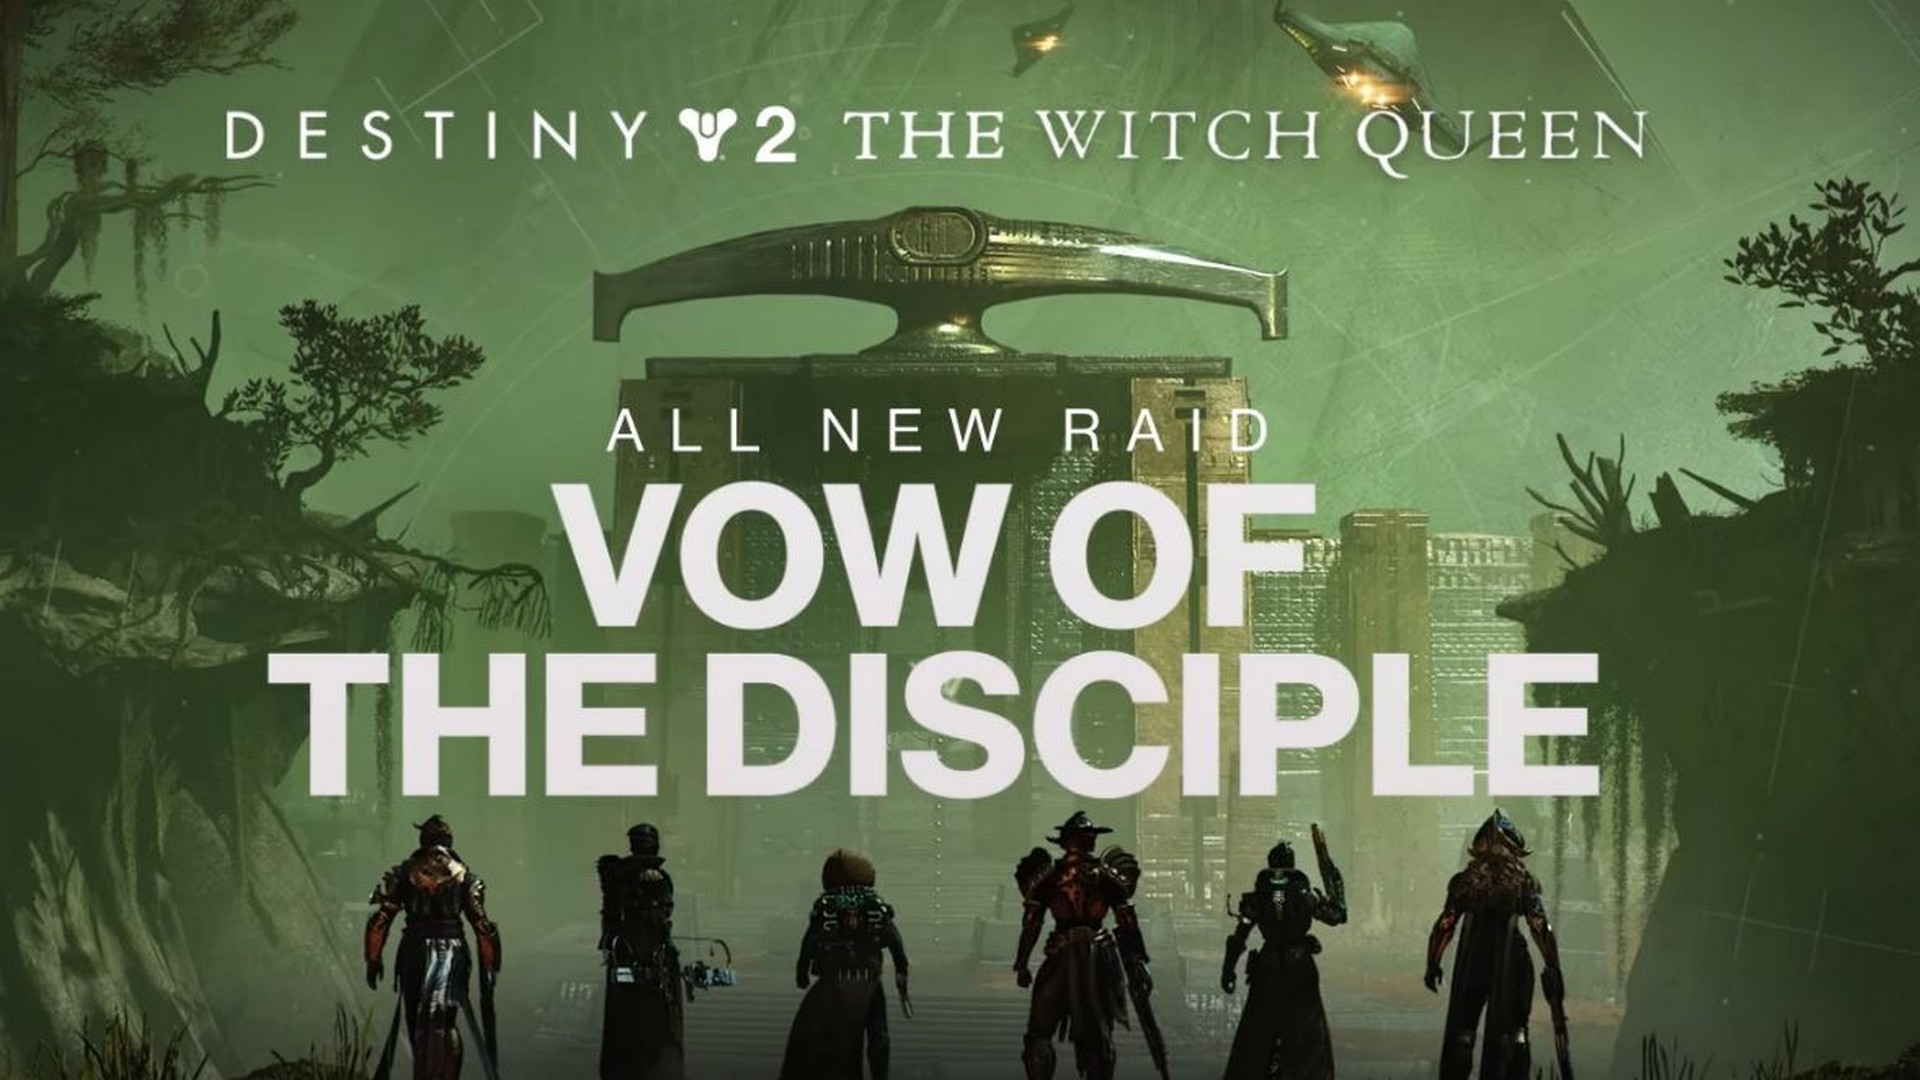 Breach The Darkness & Descend Into “Vow Of The Disciple” Destiny 2’s Newest Raid In The Witch Queen